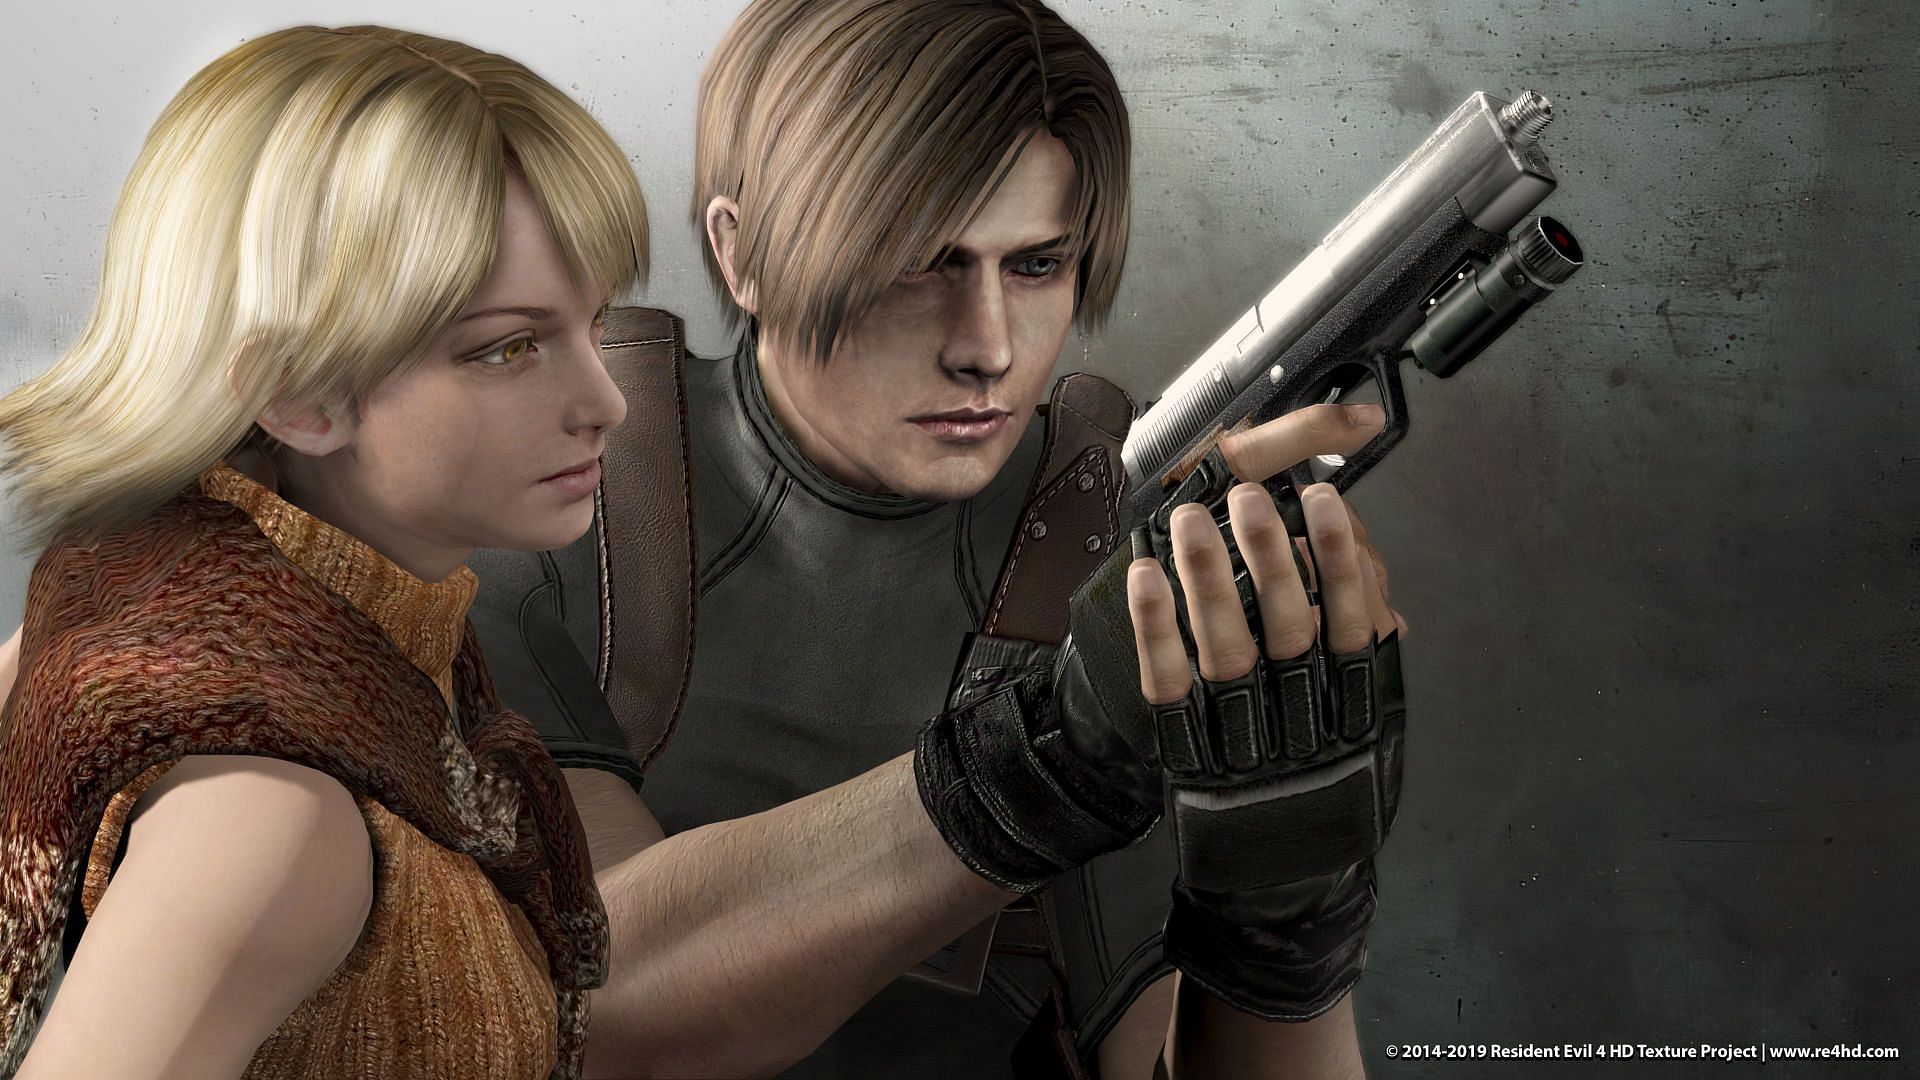 The Resident Evil 4 HD Project mod featuring Leon and Ashley (Image via Resident Evil 4 HD Project)